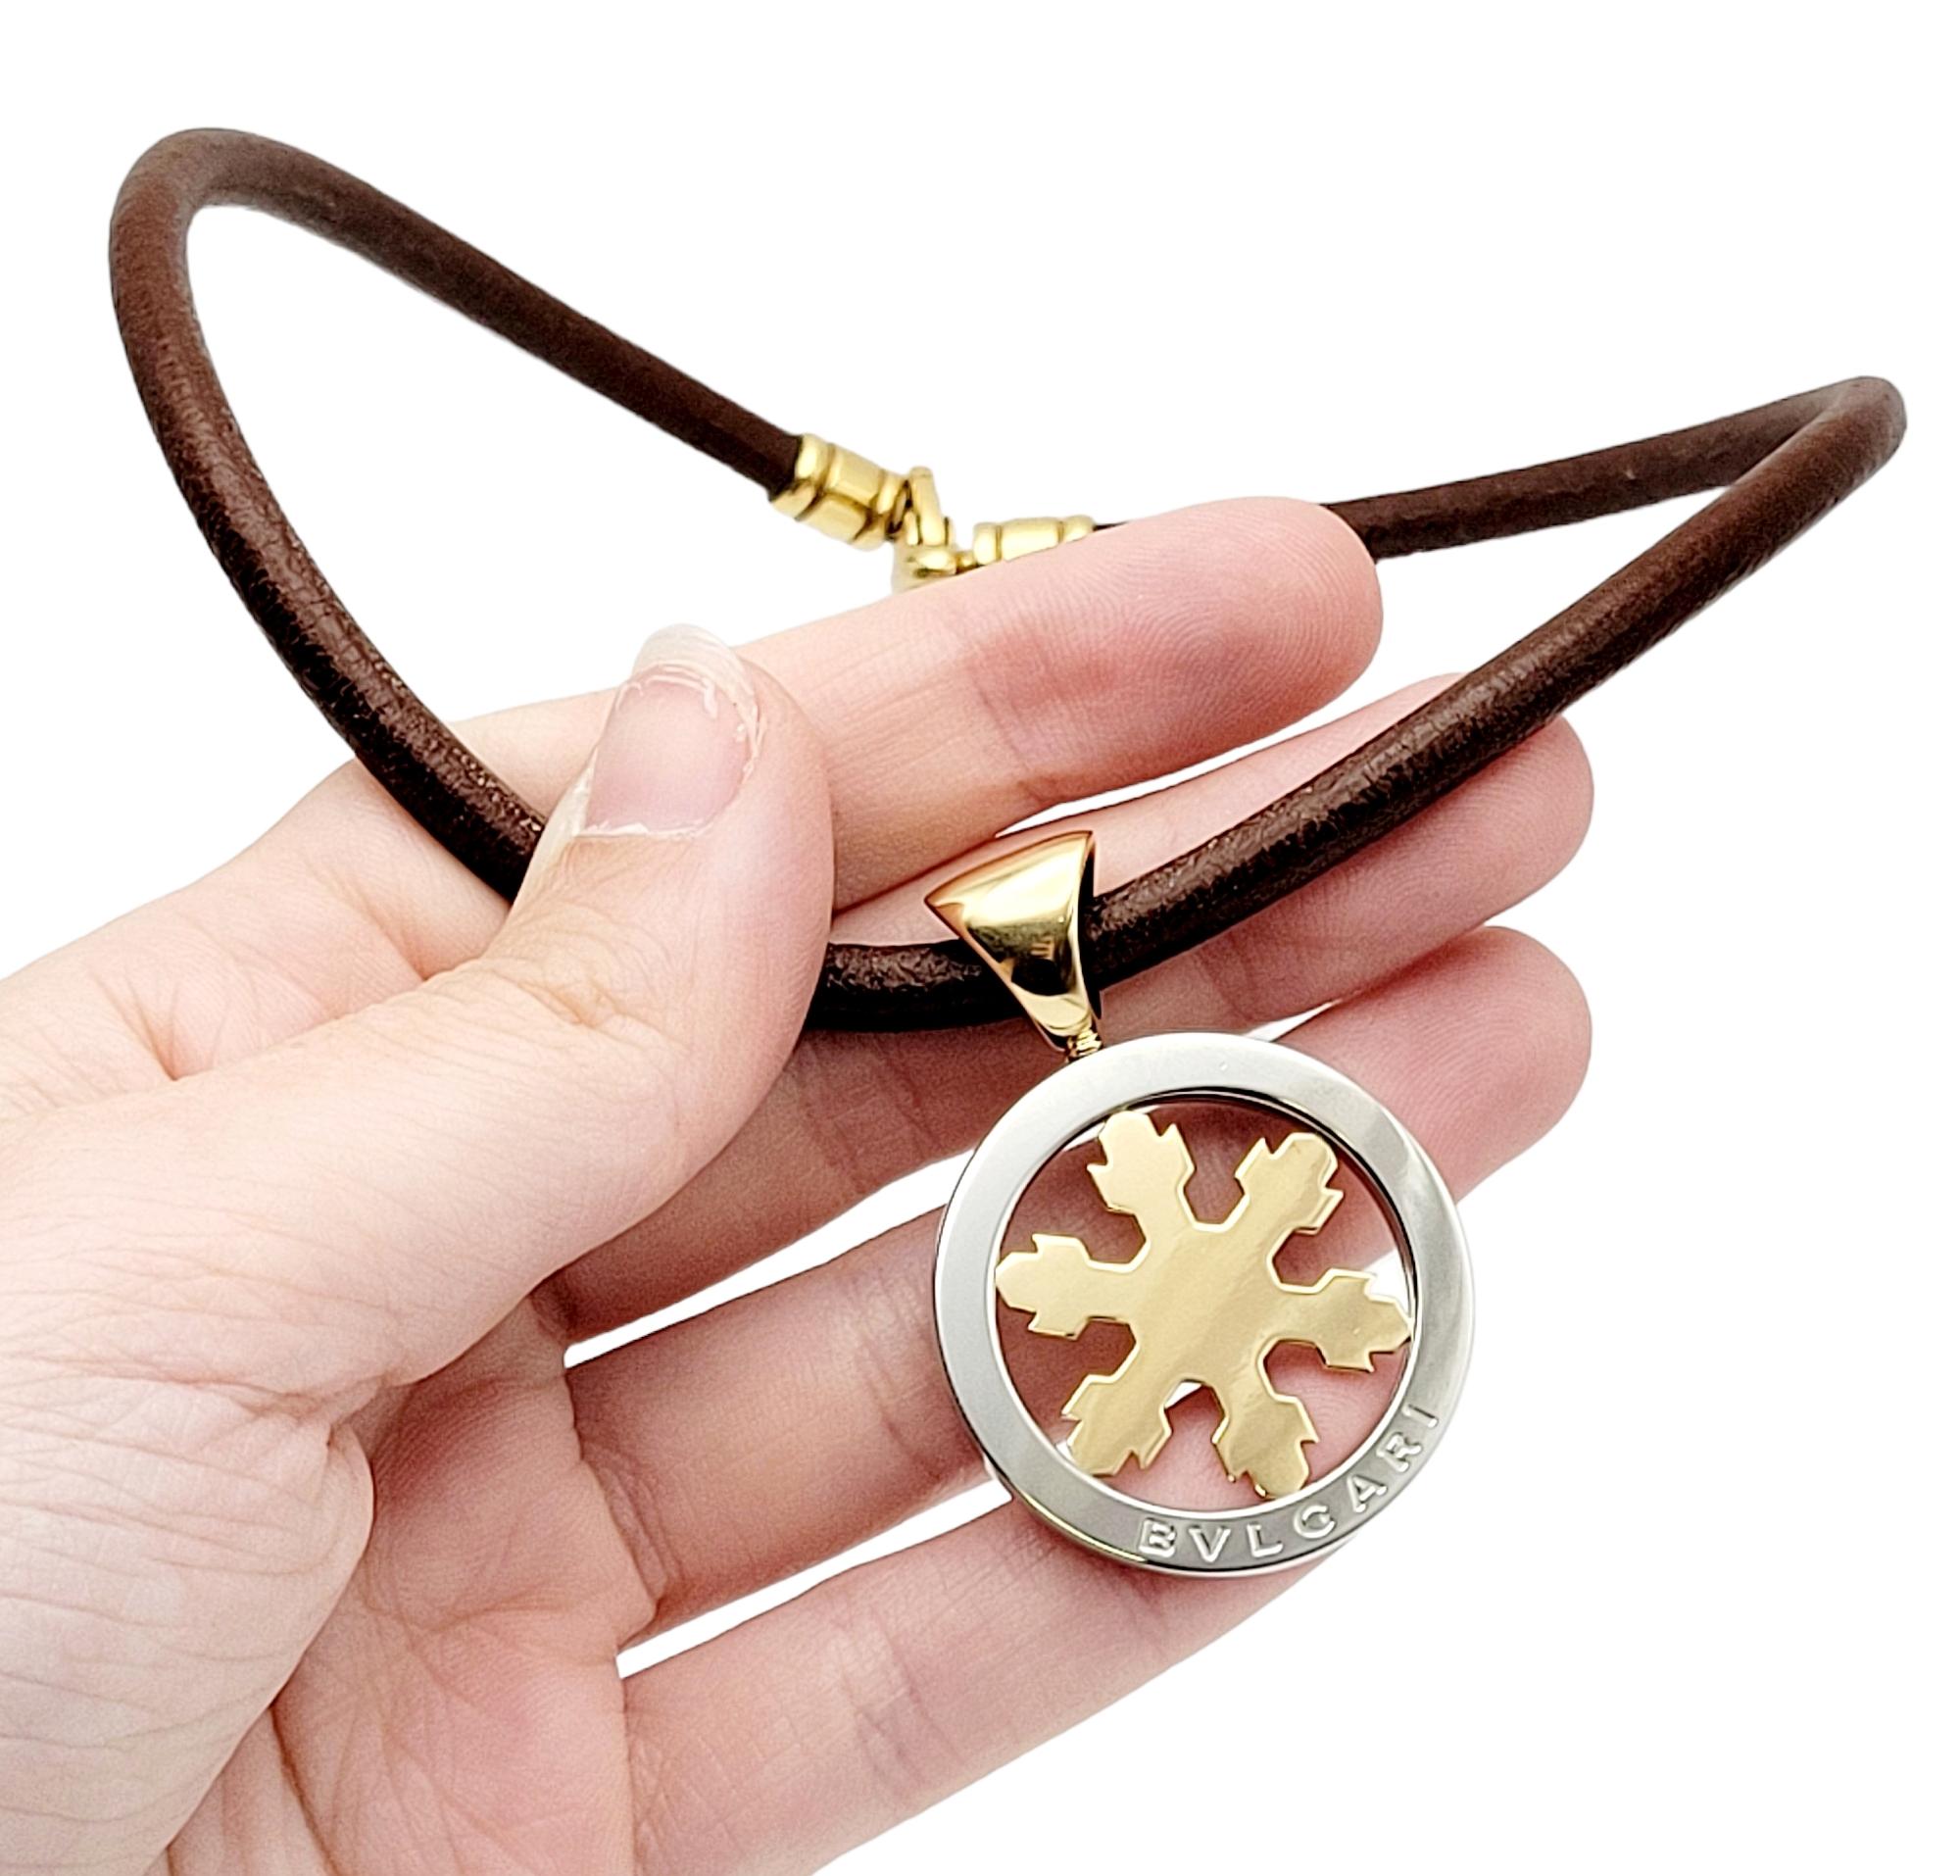 Bvlgari Tondo Snowflake Leather Necklace in 18k Yellow Gold & Stainless Steel 8